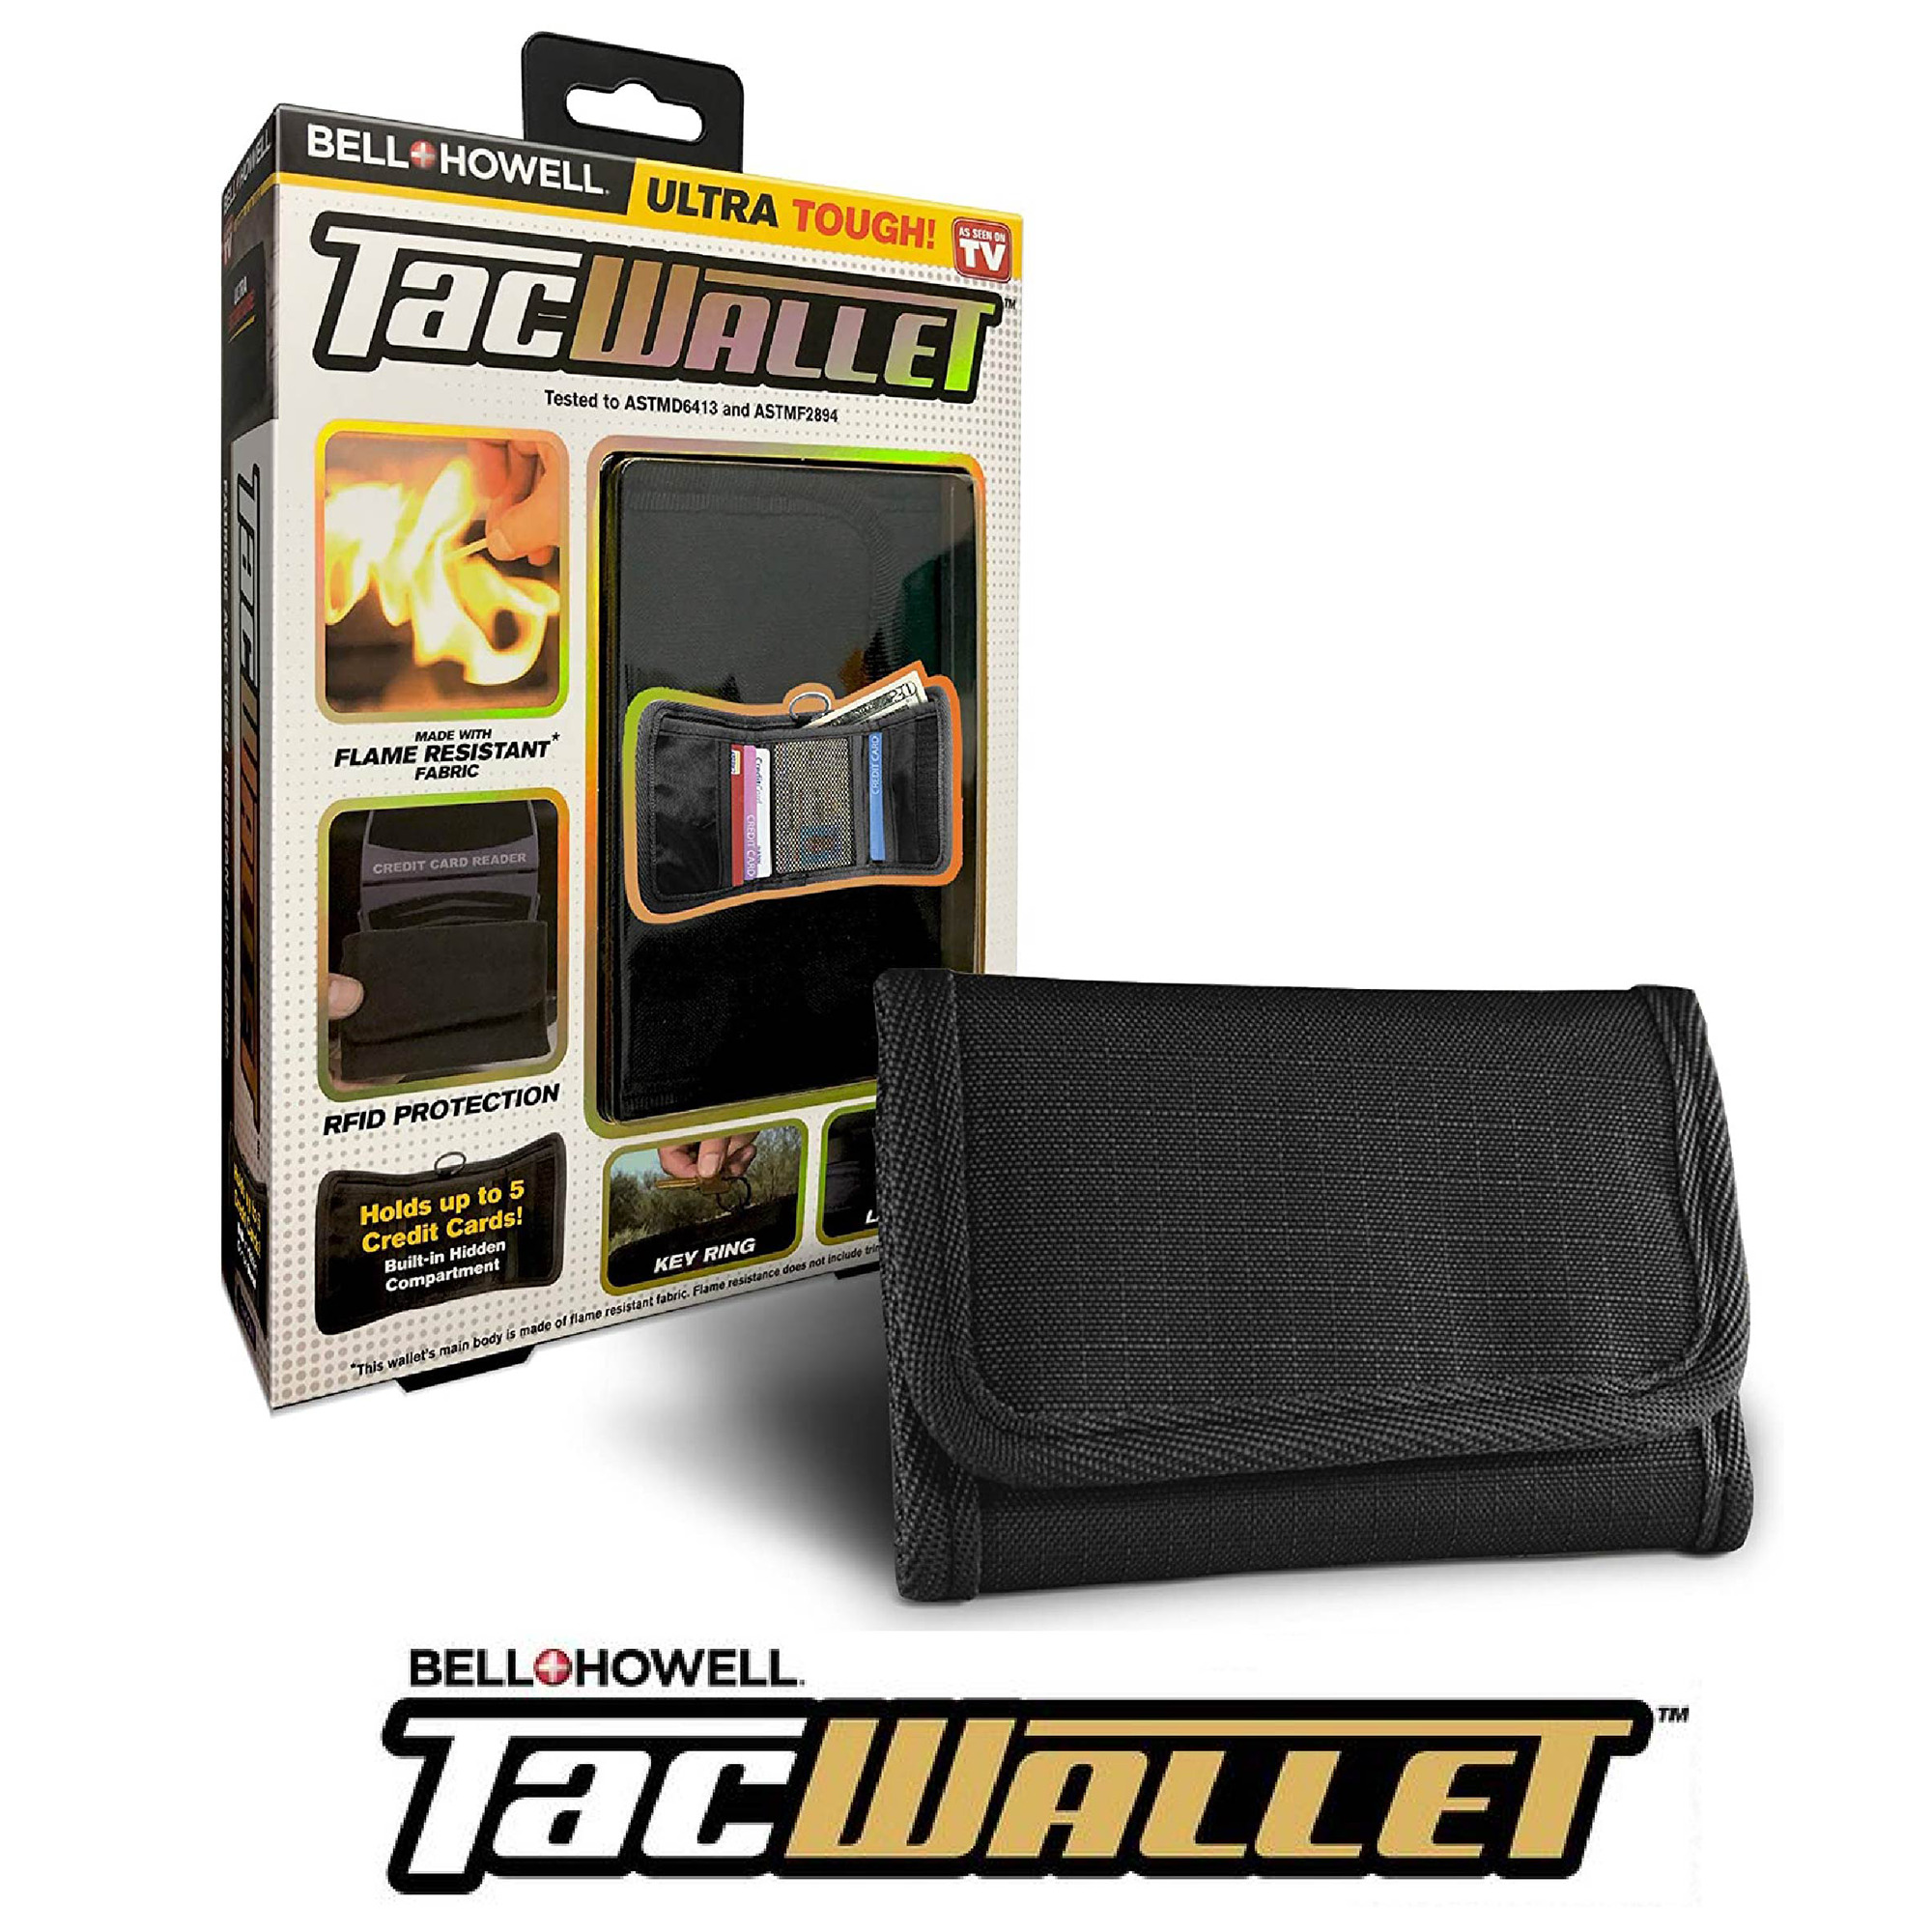 TacWallet